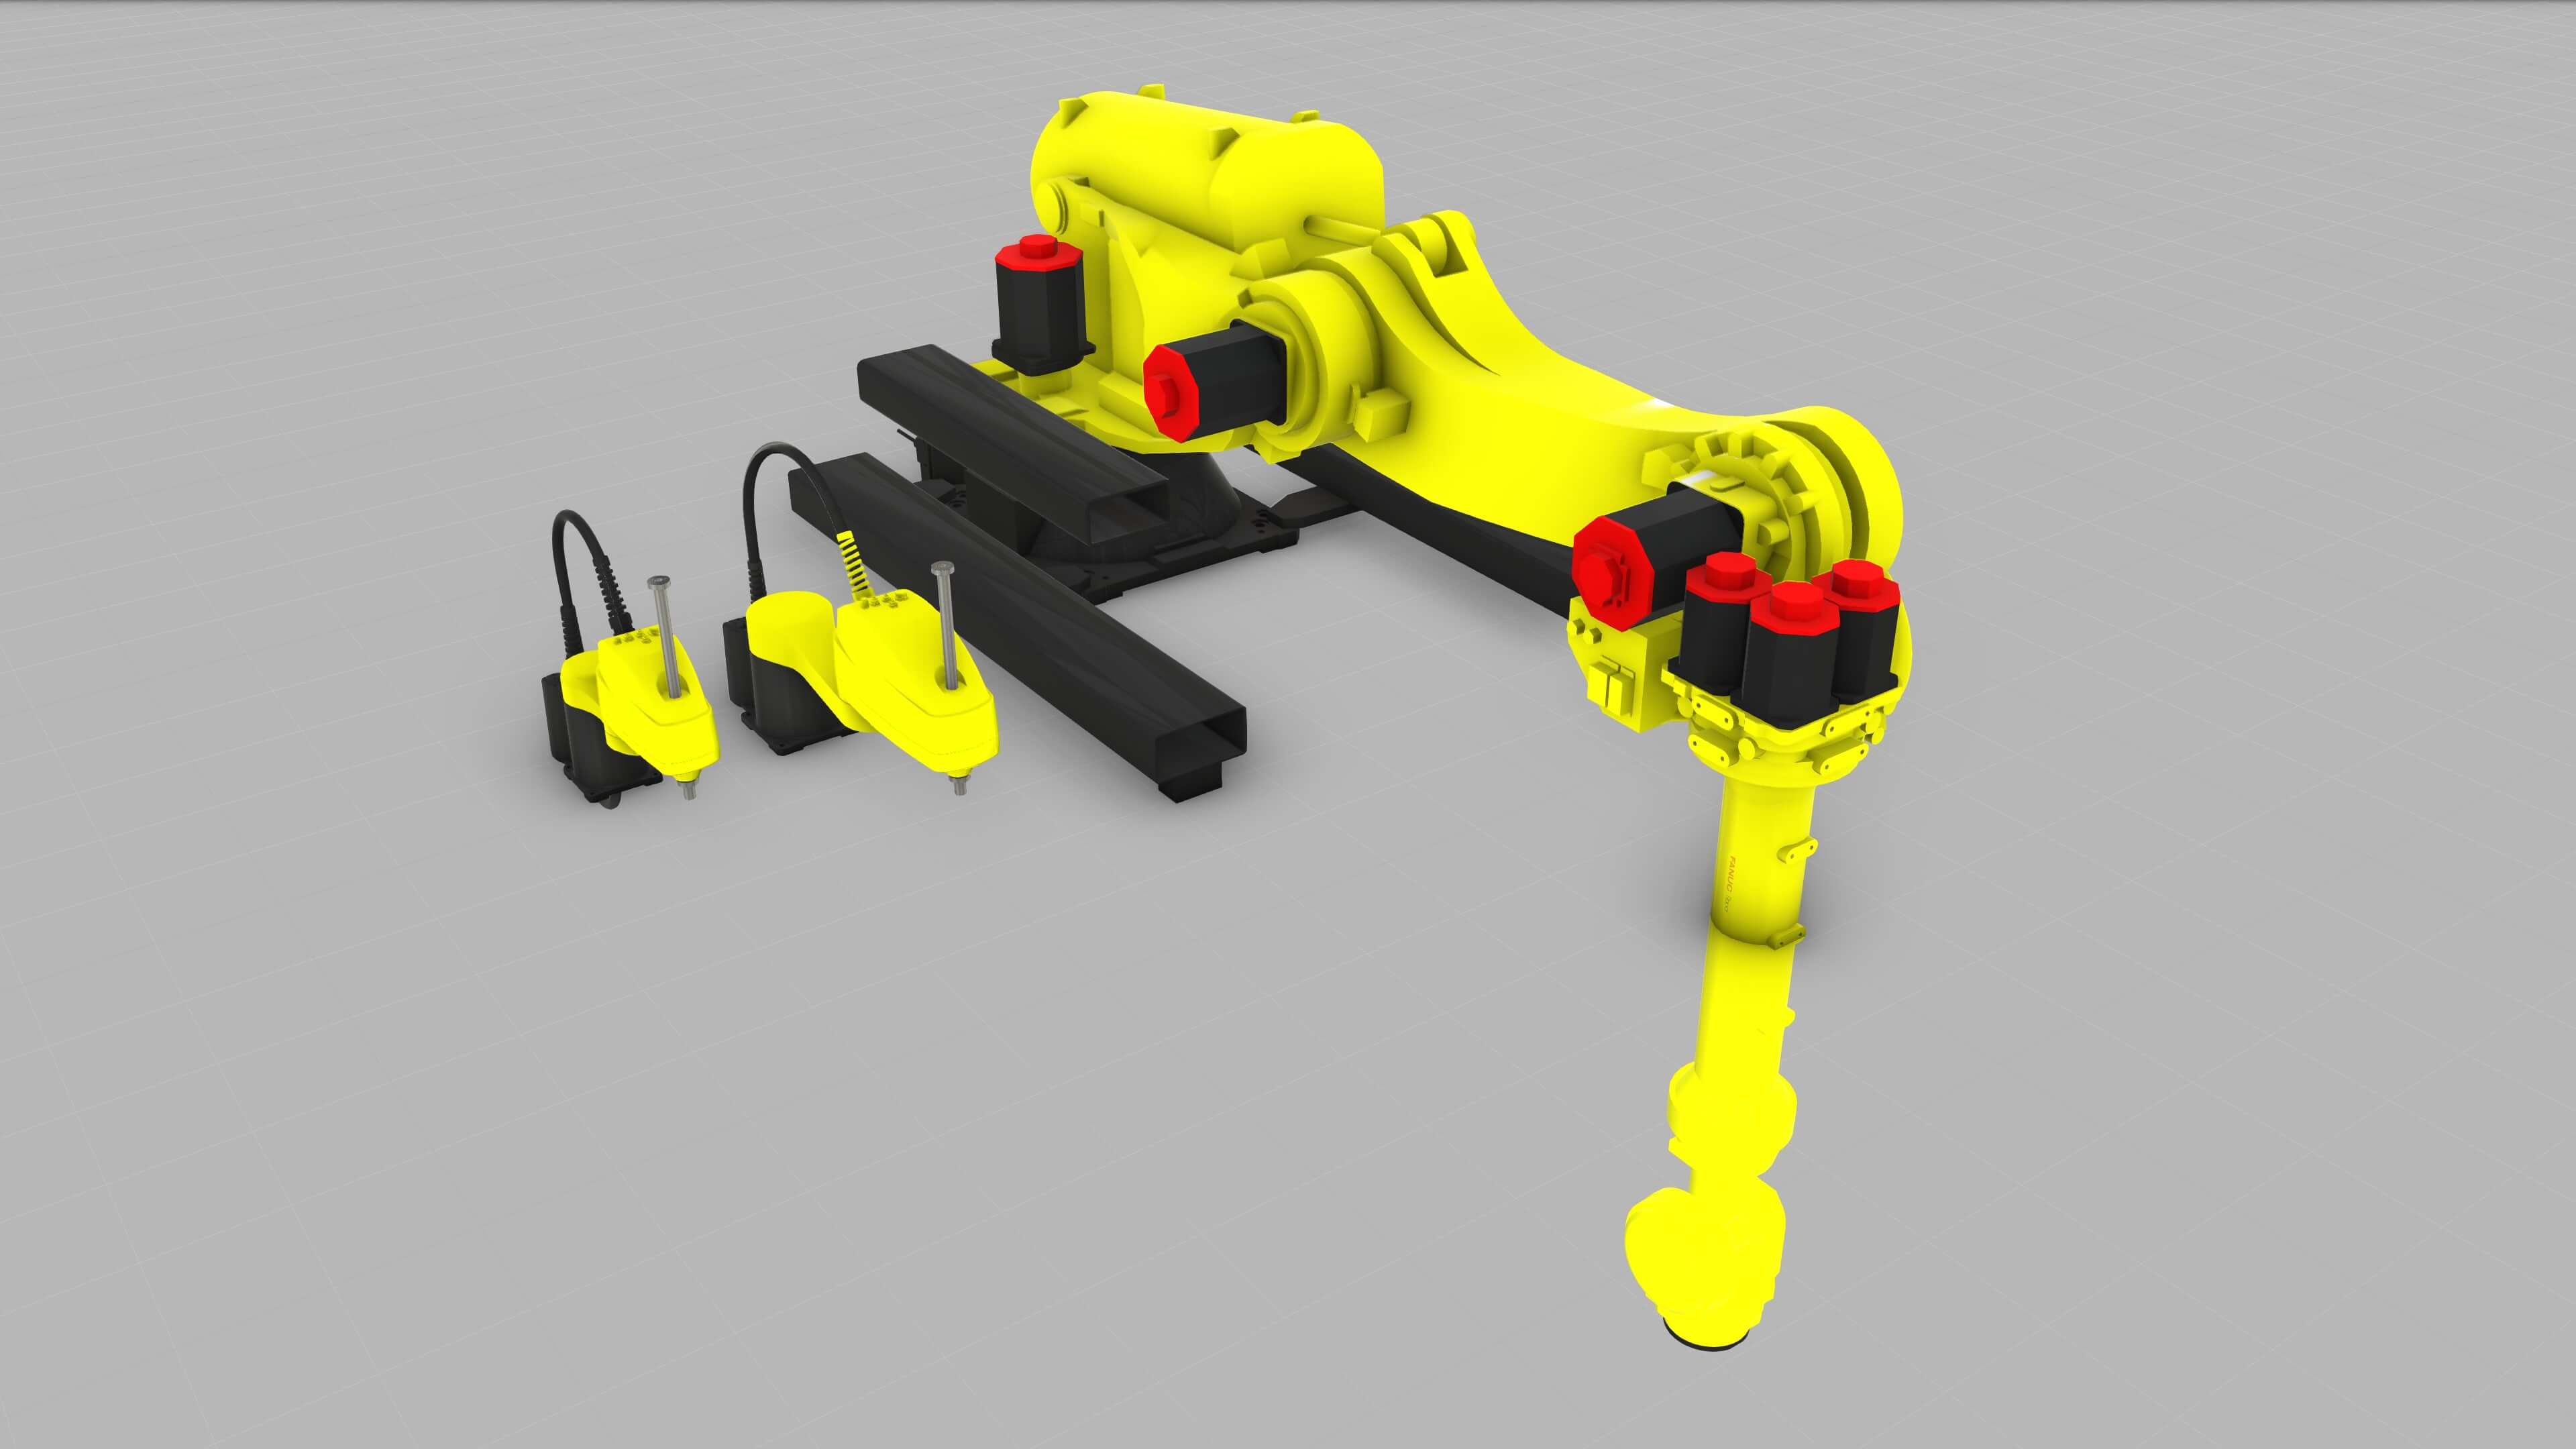 The new Fanuc component additions to Visual Components eCatalog in December 2018